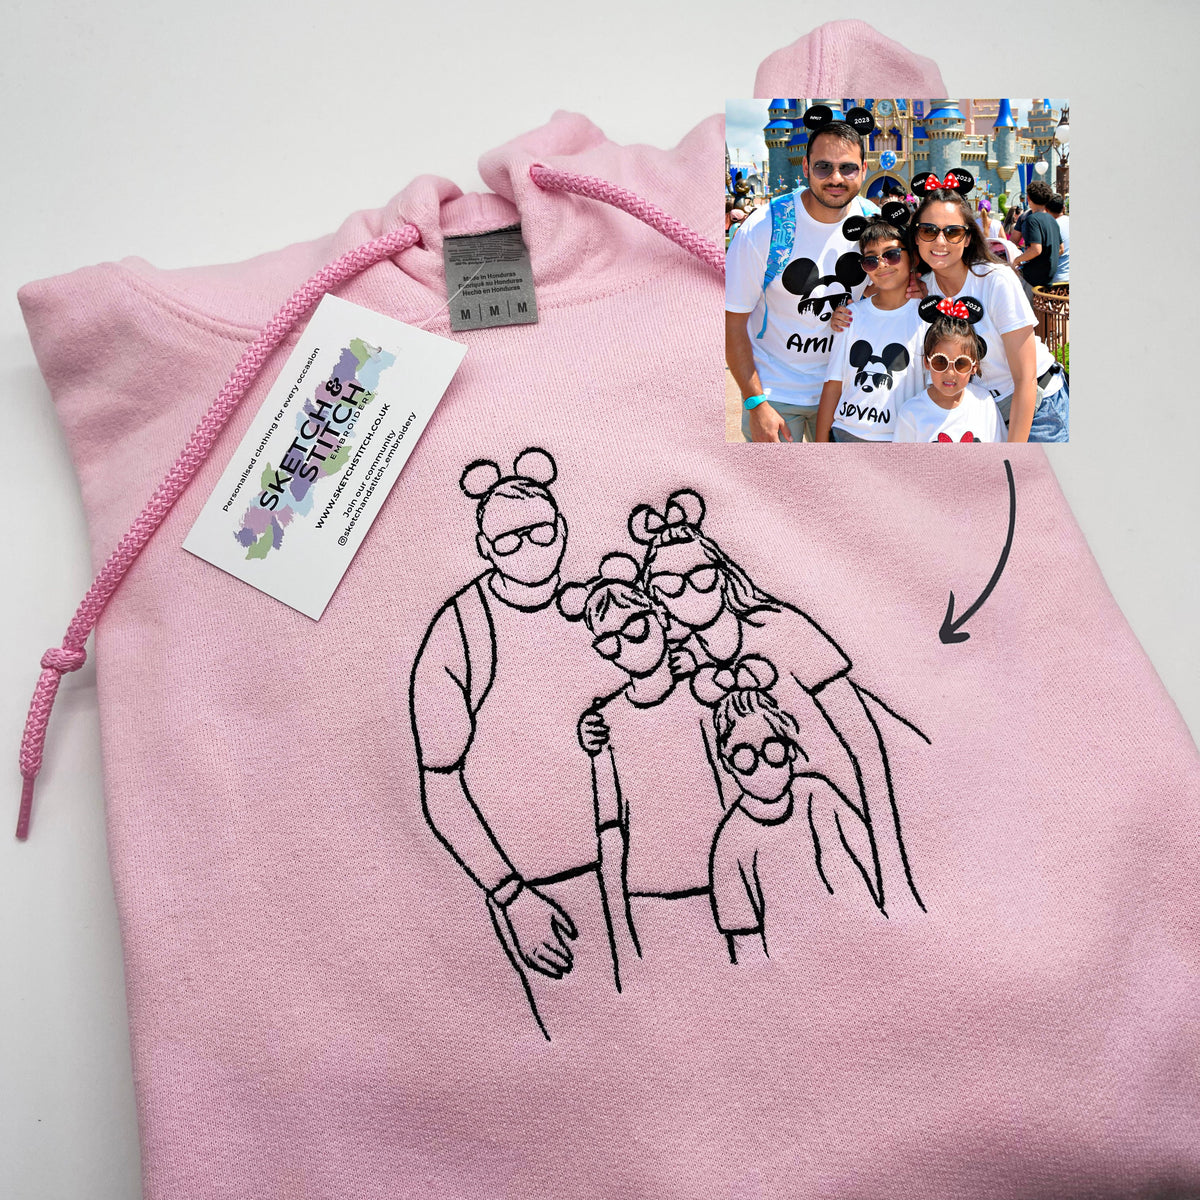 Father's Day Men's hoodie personalised photo outline